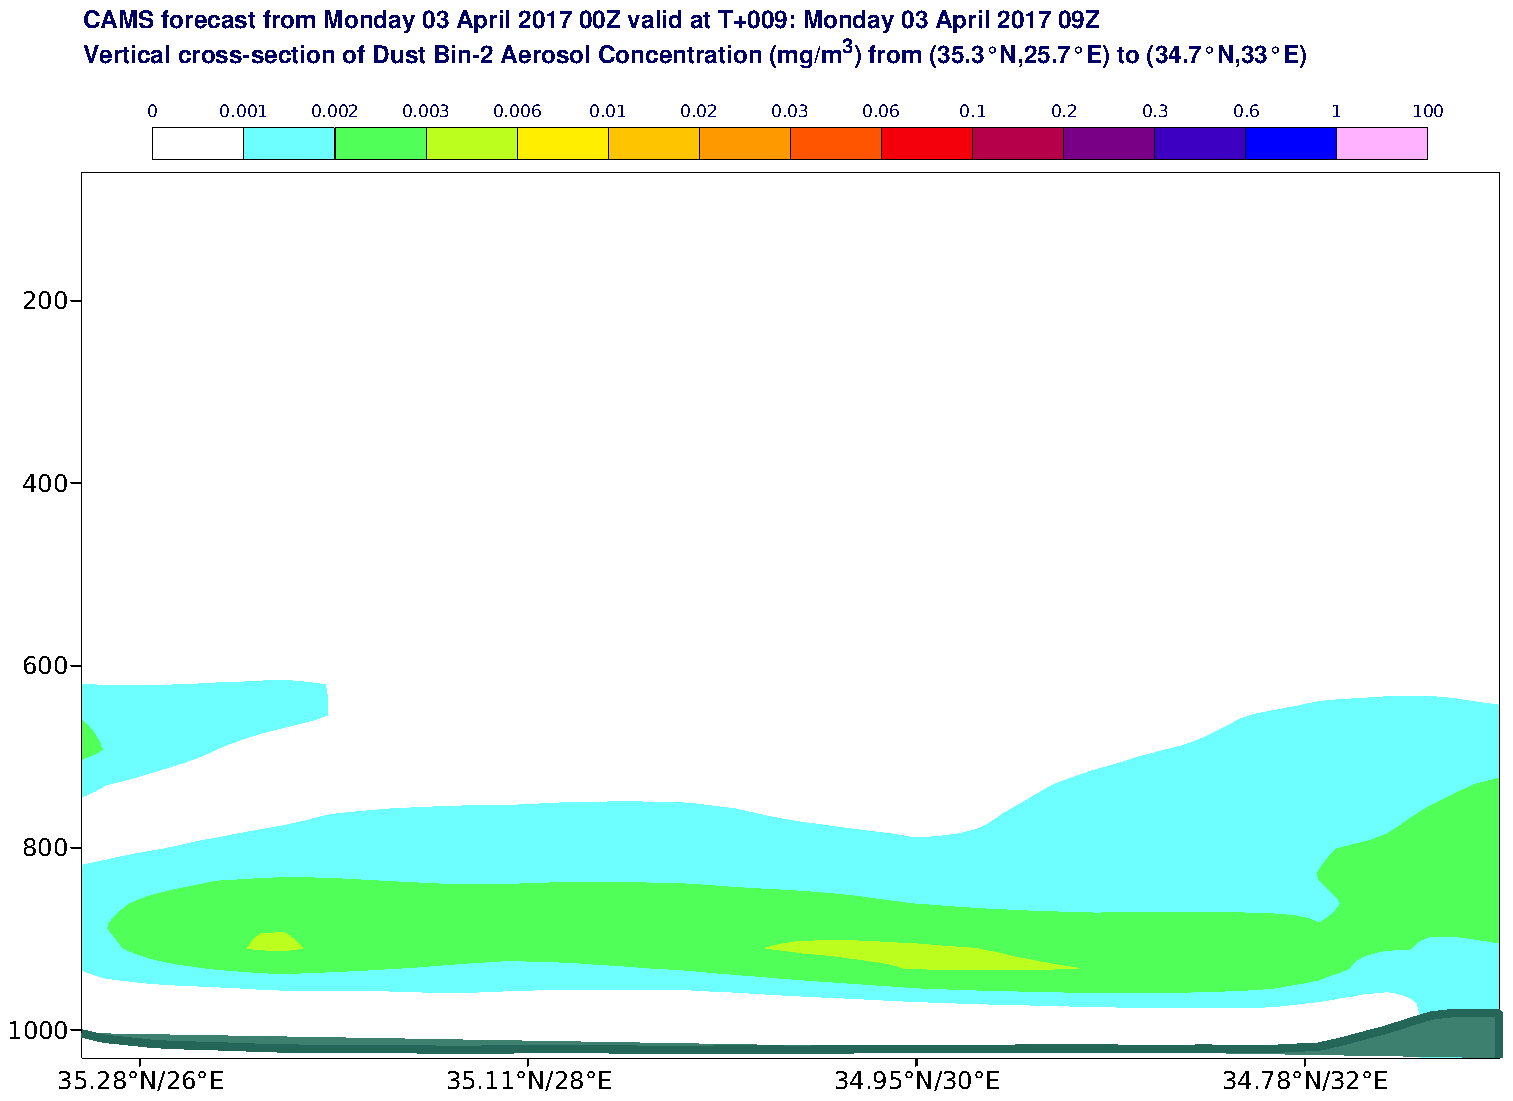 Vertical cross-section of Dust Bin-2 Aerosol Concentration (mg/m3) valid at T9 - 2017-04-03 09:00